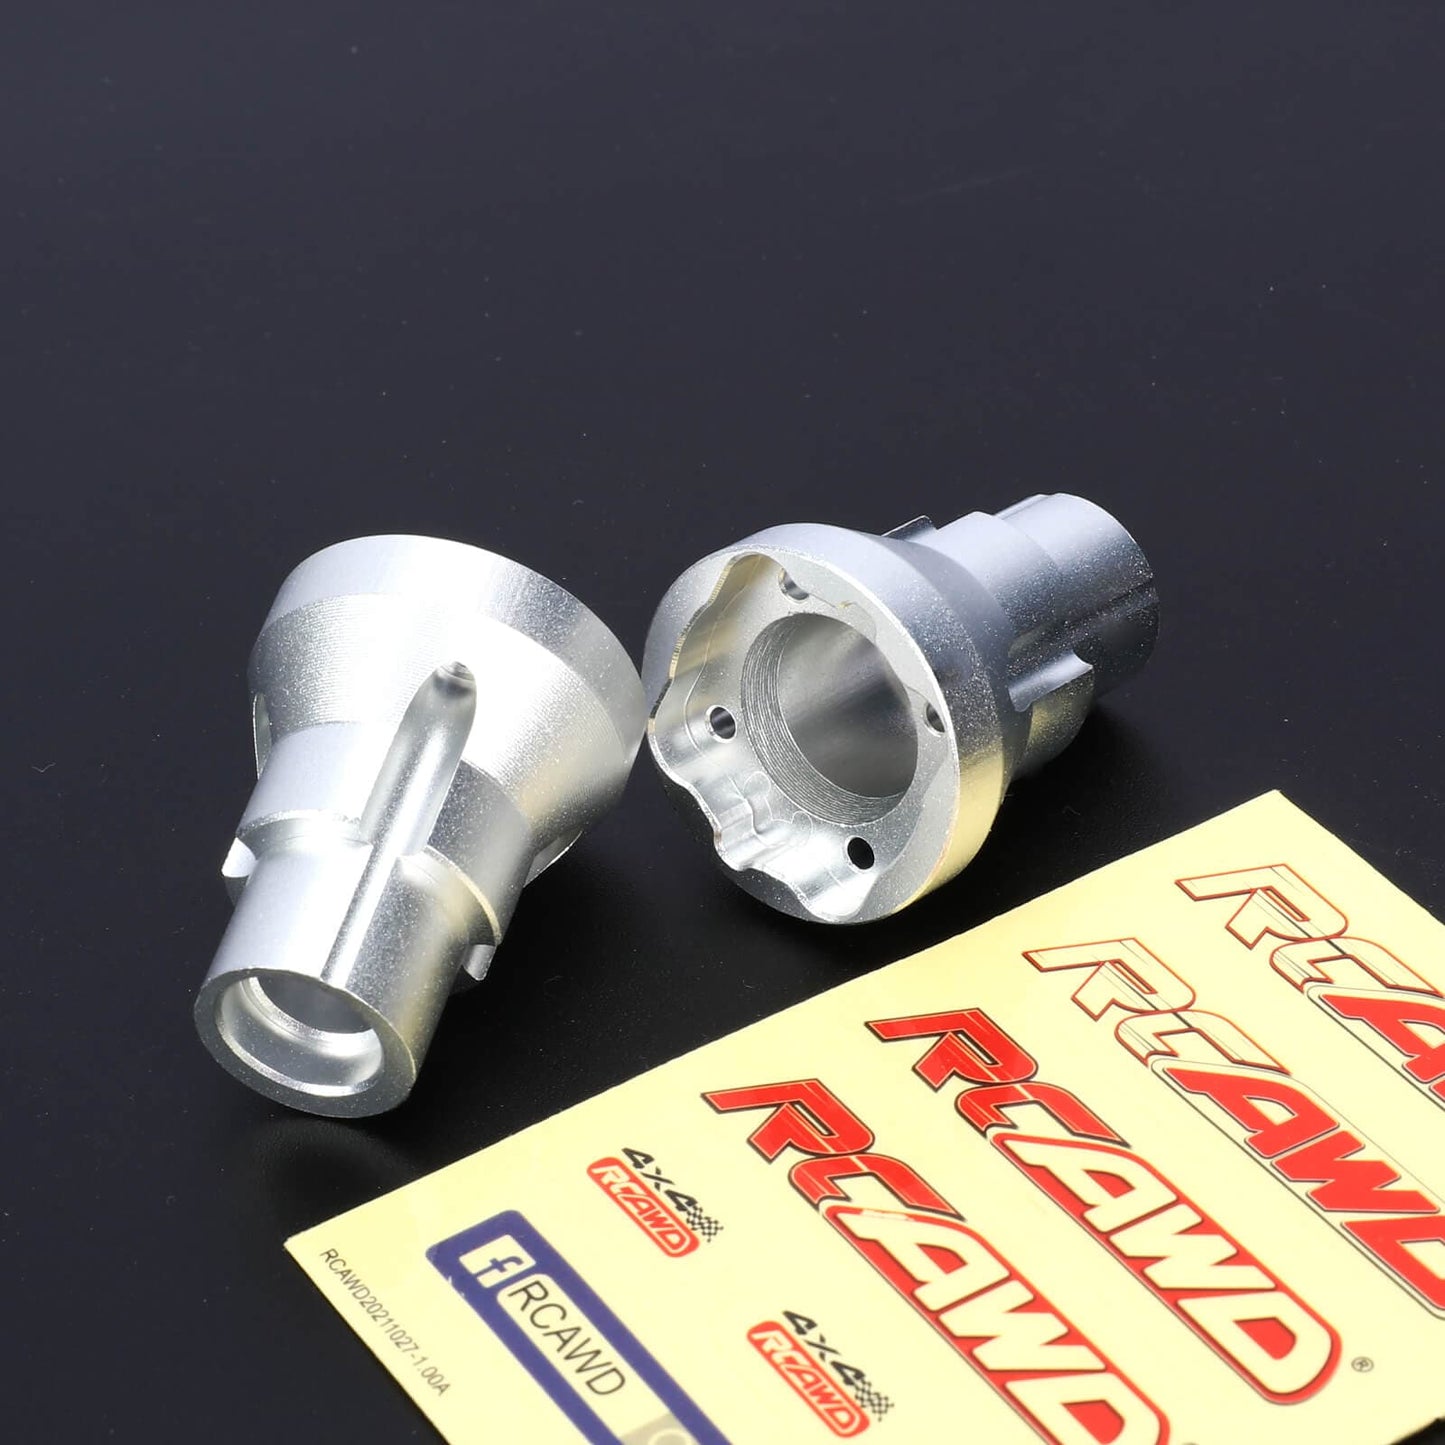 RCAWD LOSI 1/8 LMT Silver / Rear Axle Mount set RCAWD Losi Upgrades Spindle Carrier Set with Spindle Carrier Set for1/8 LMT LOS244003 LOS242052